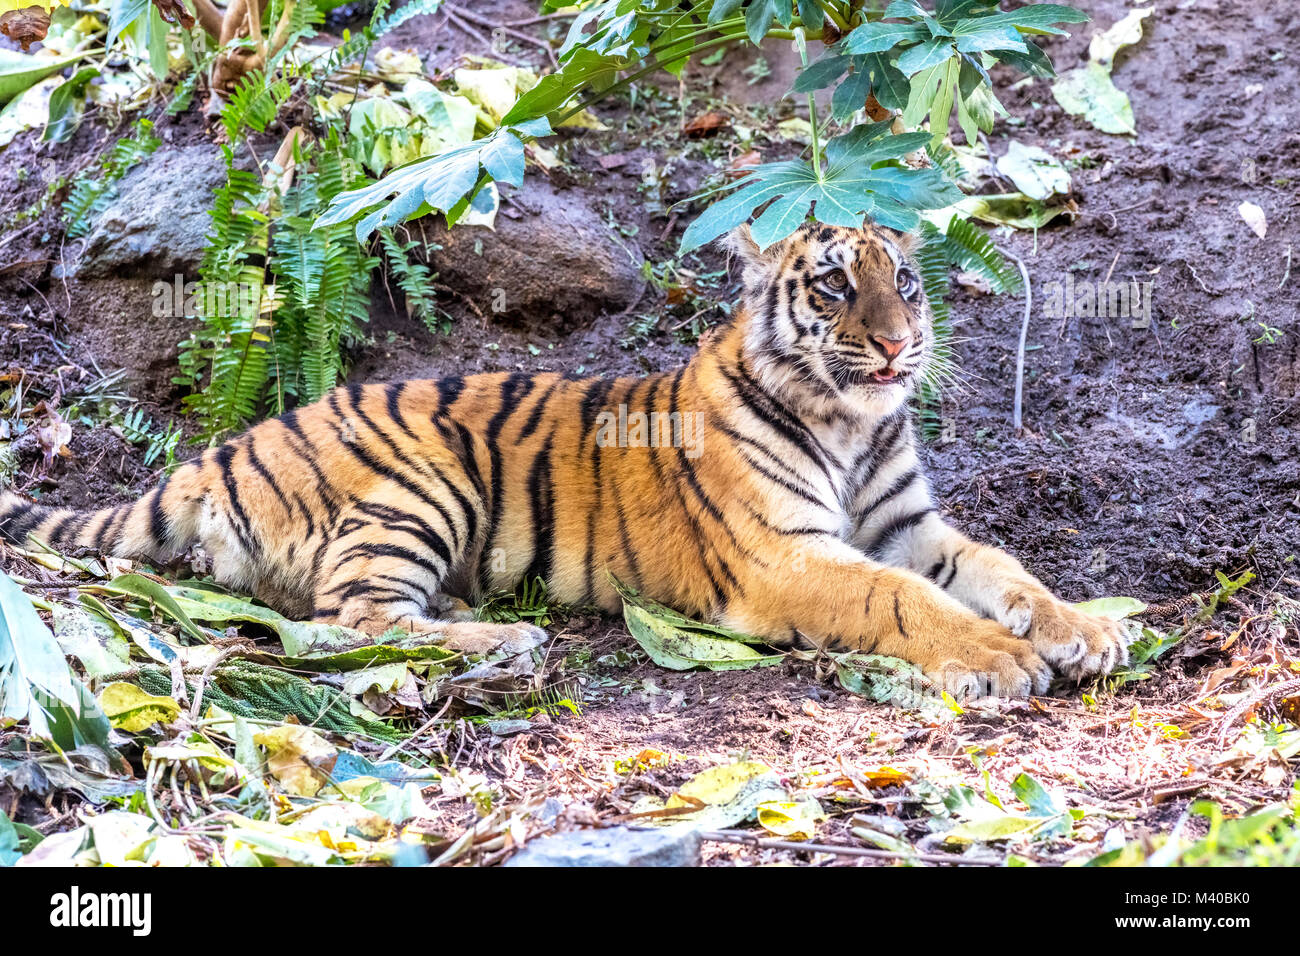 A rare and powerful Sumatran tiger rests in a shaded area during a safari Stock Photo